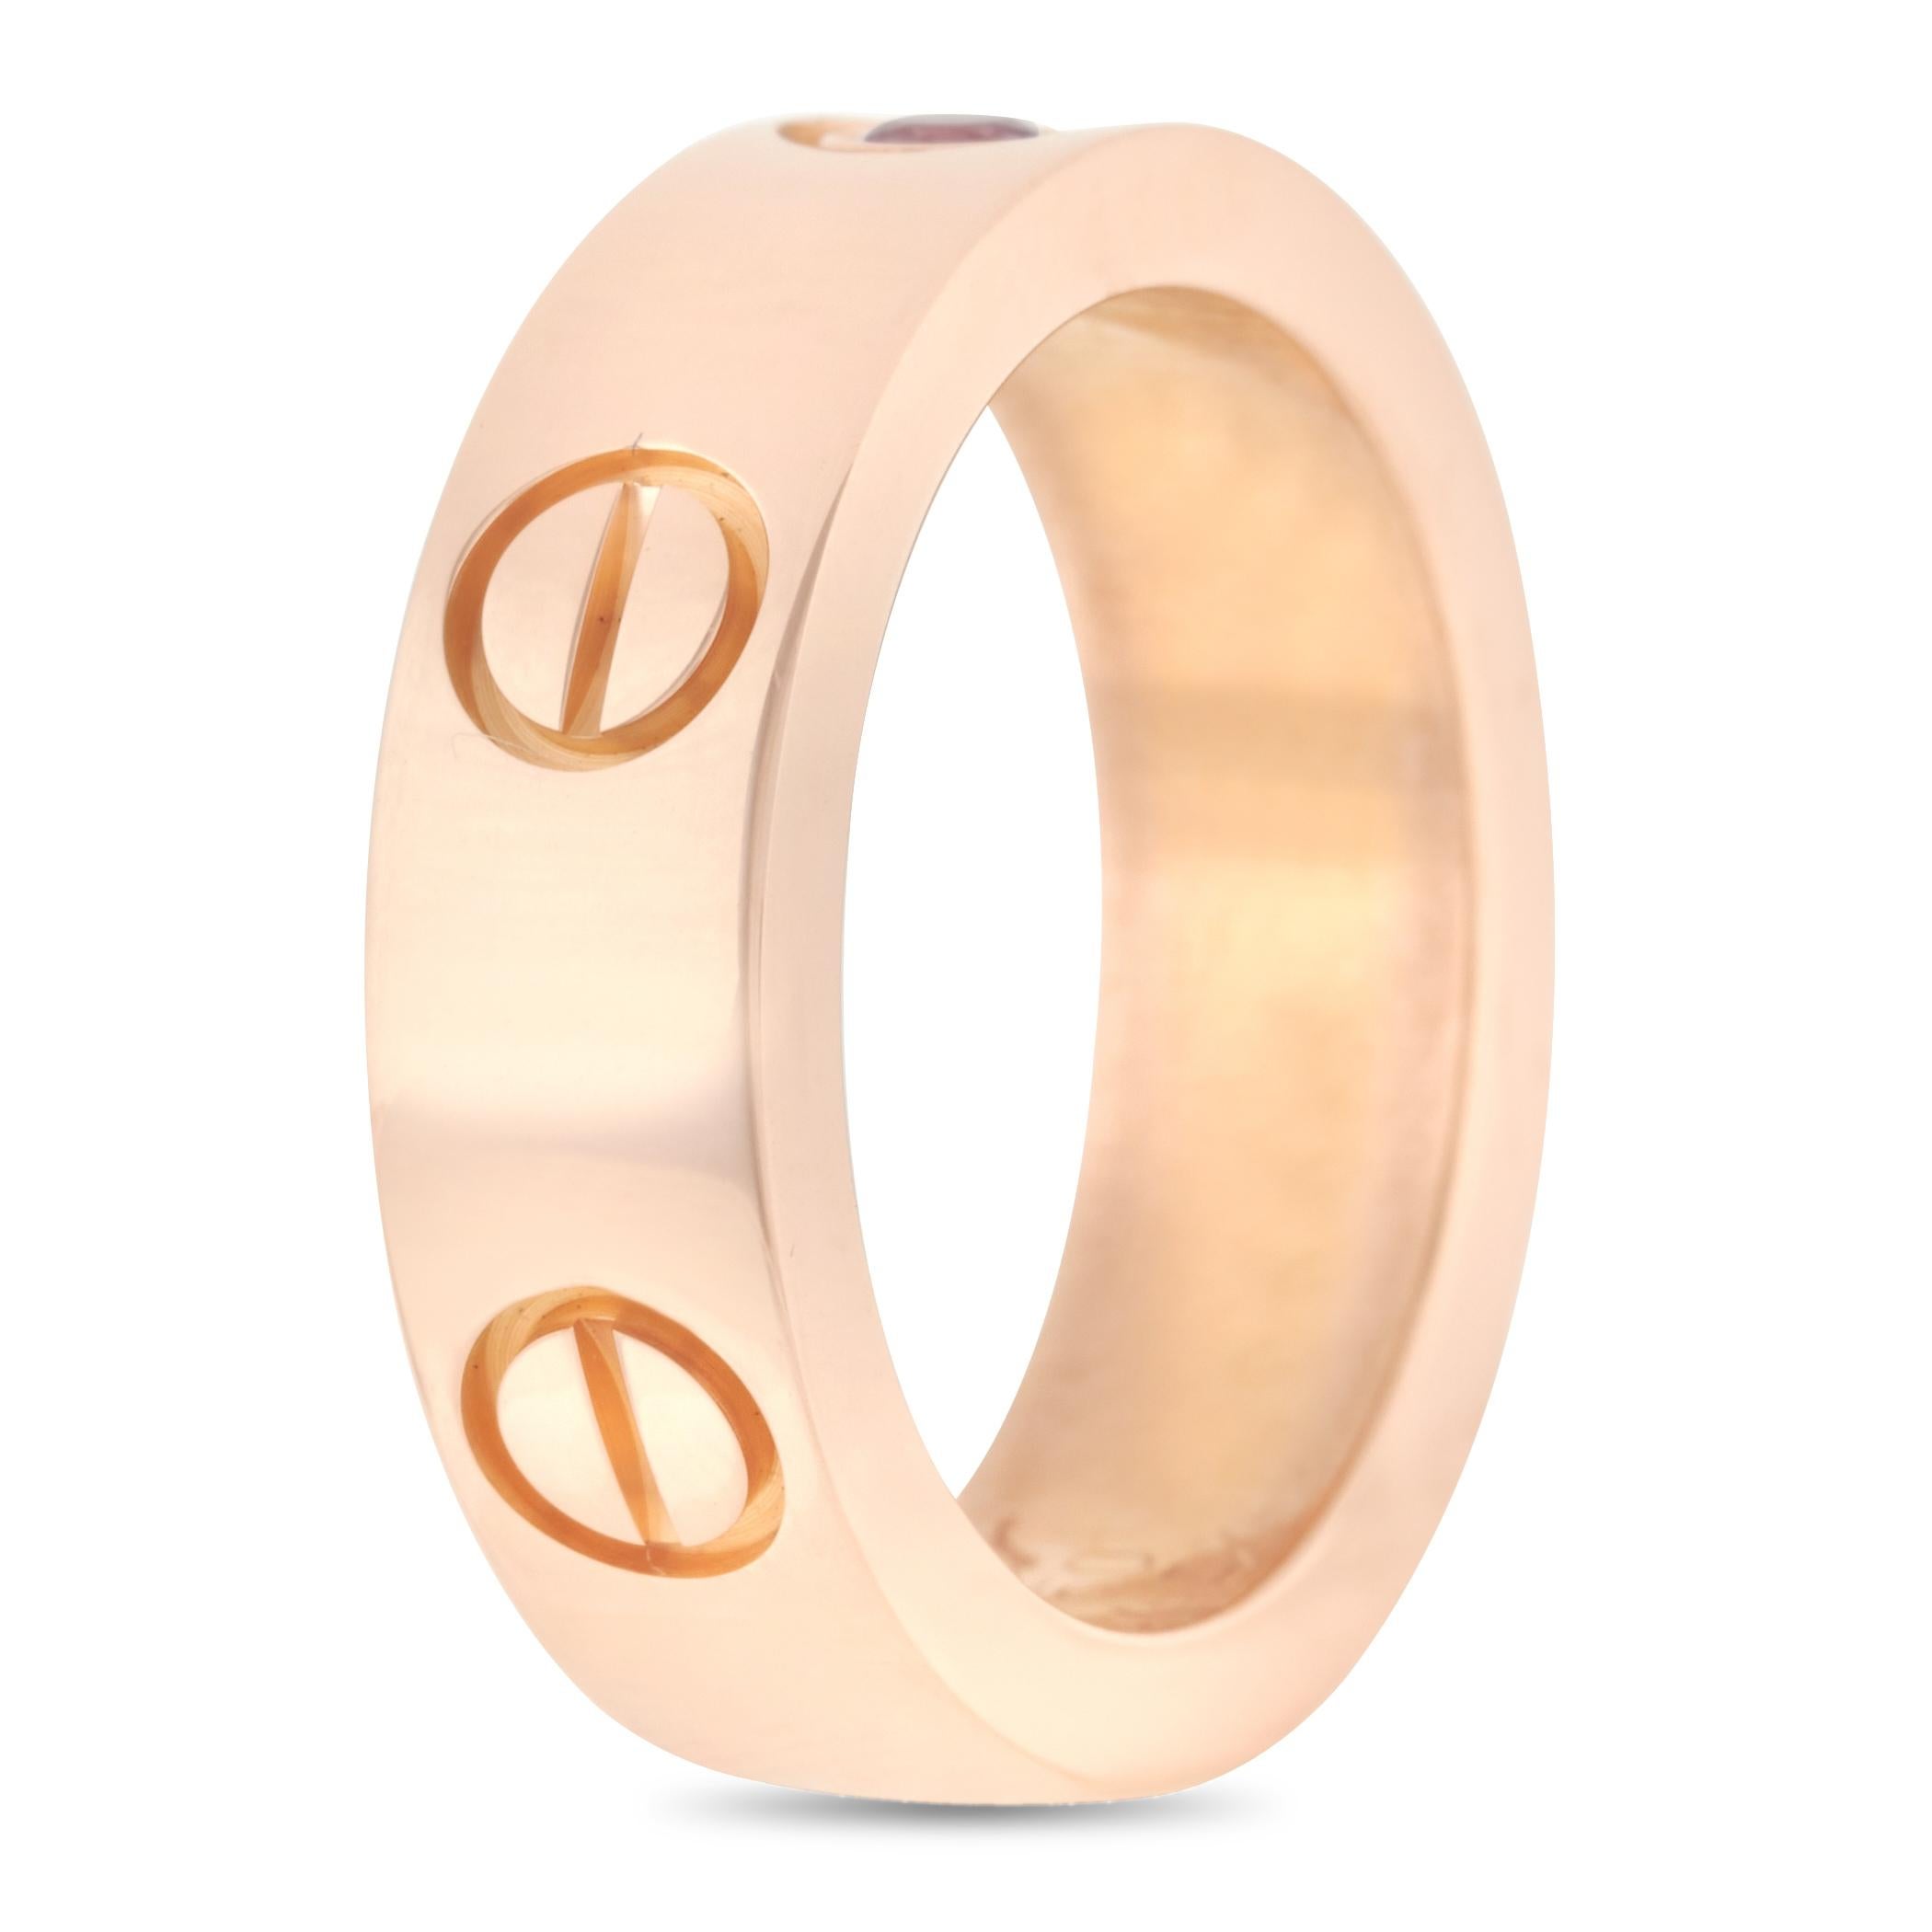 A Cartier Love Ring fashioned from 18K rose gold and set with one pink sapphire. This 5mm rosy band with a rosy gem displays a compelling beauty you'll be so smitten you'll blush. Treat yourself to this pink gold ring and show yourself some love. 
